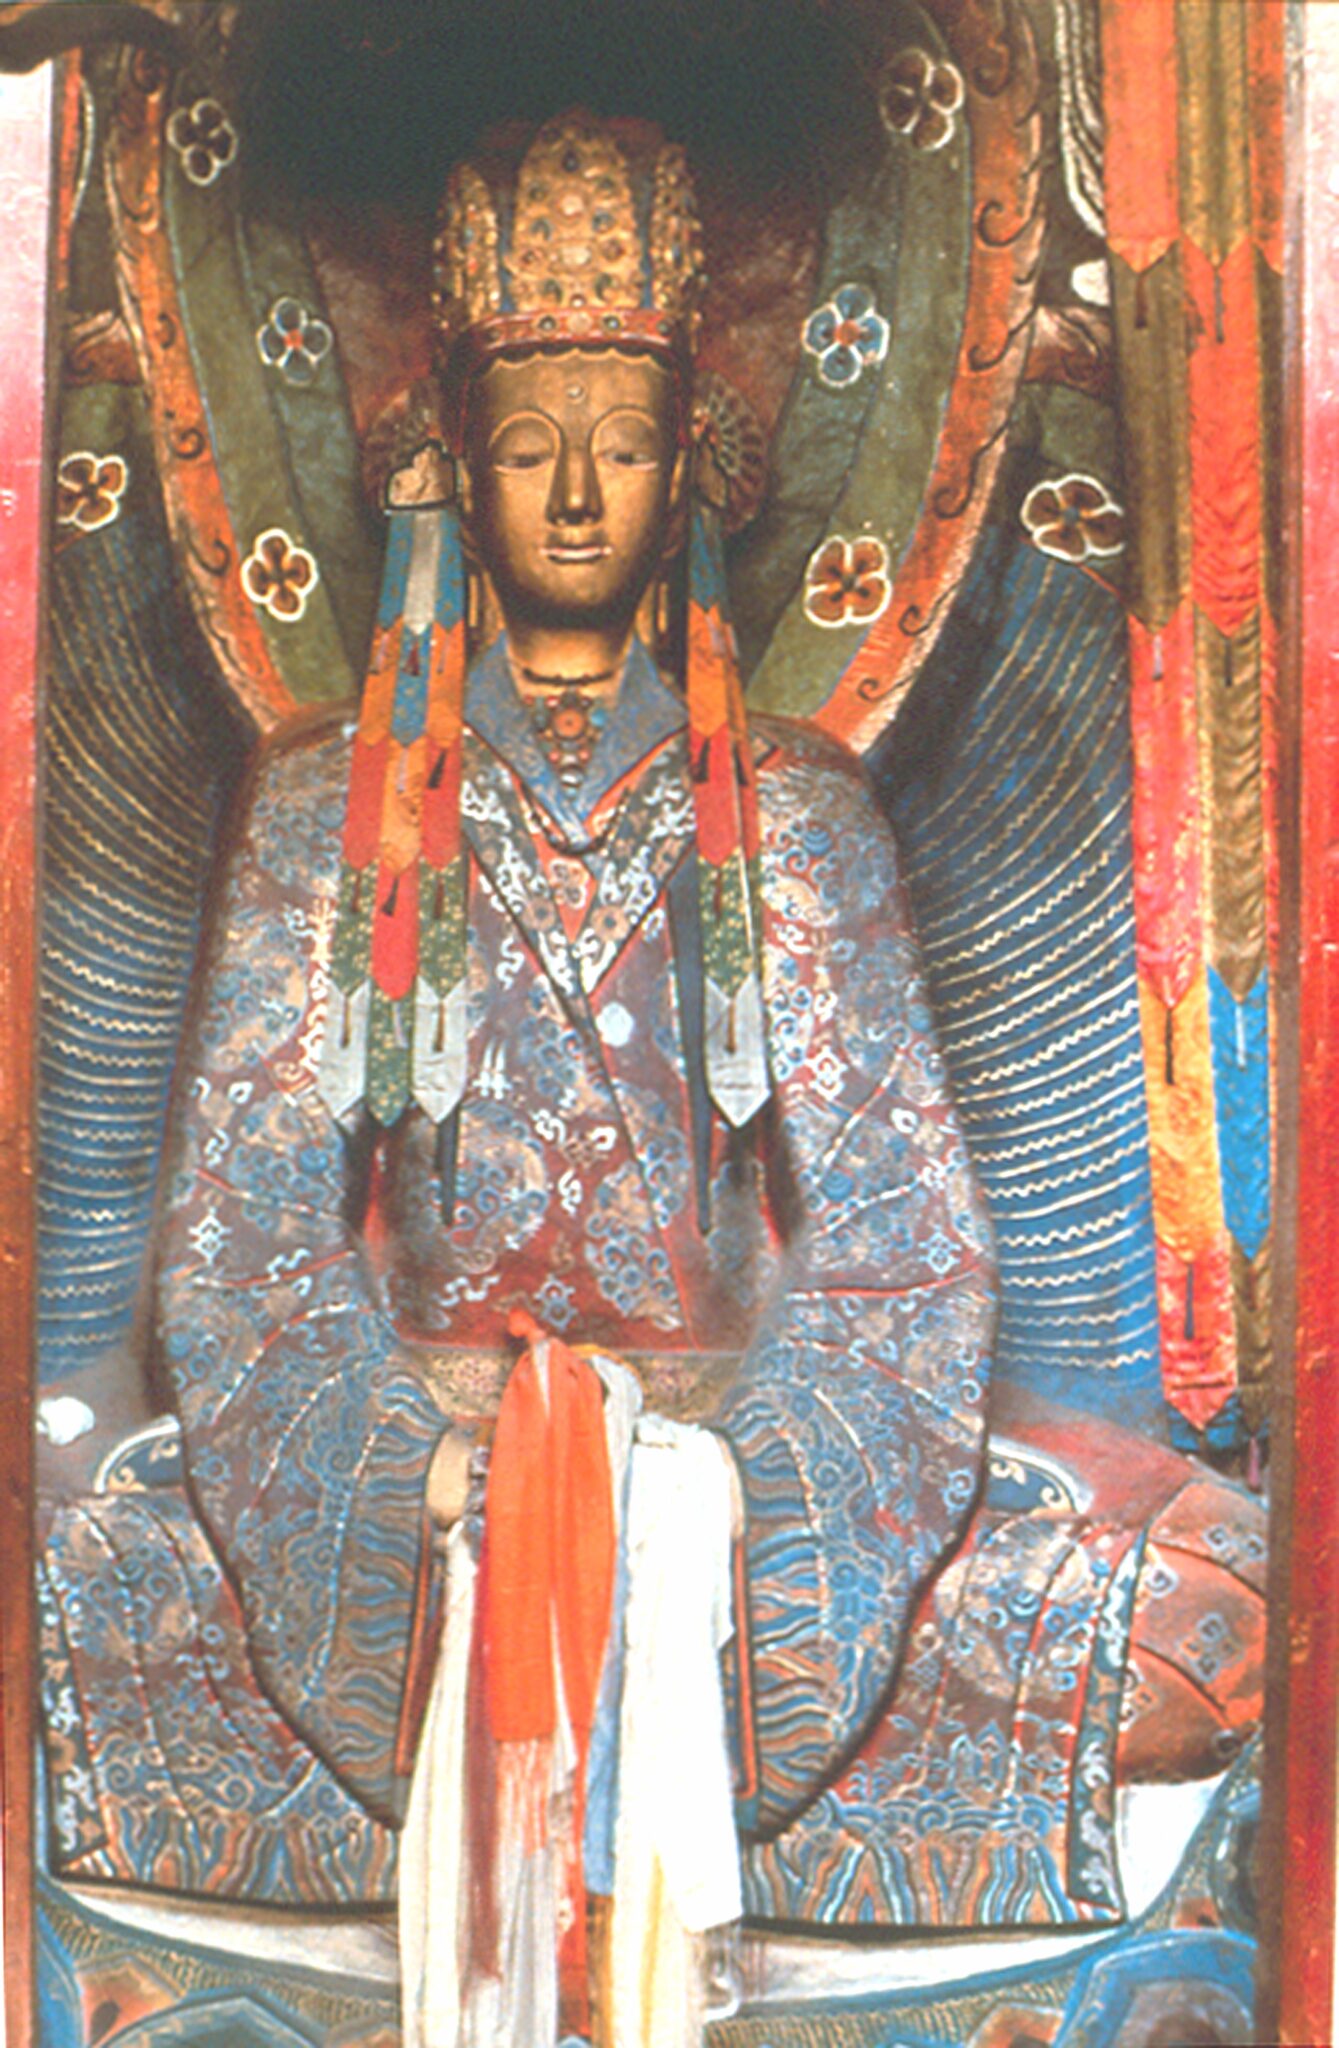 Seated Buddha wearing patterned robe in stone relief decorated with paint and textiles